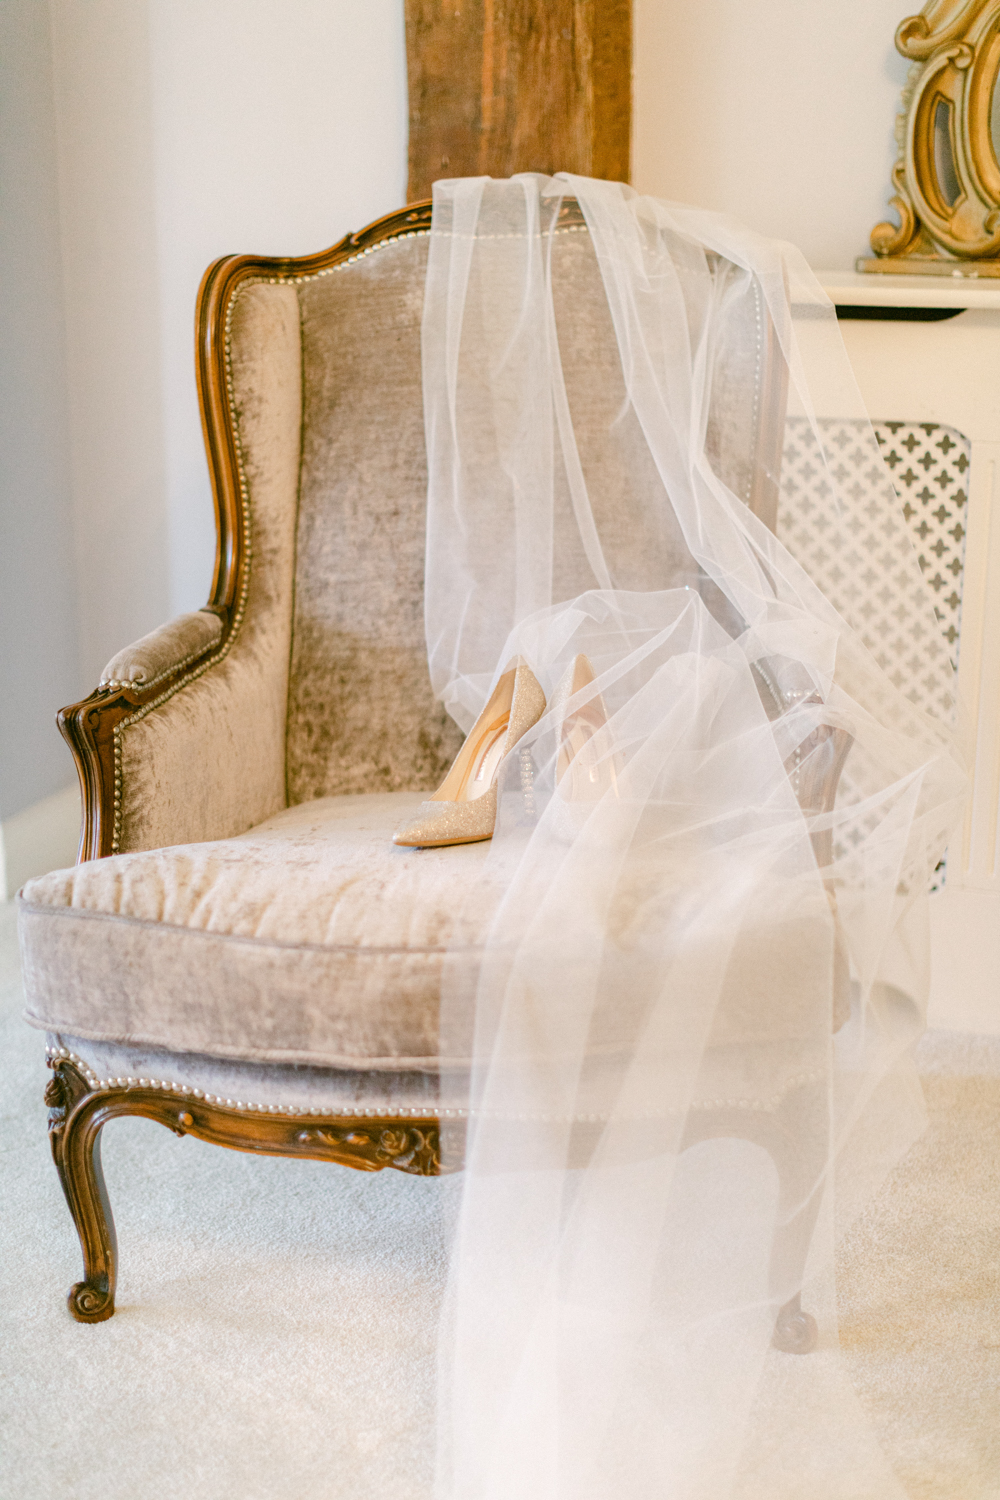 Romantic veil with shoes placed on seat at Brinsop Court